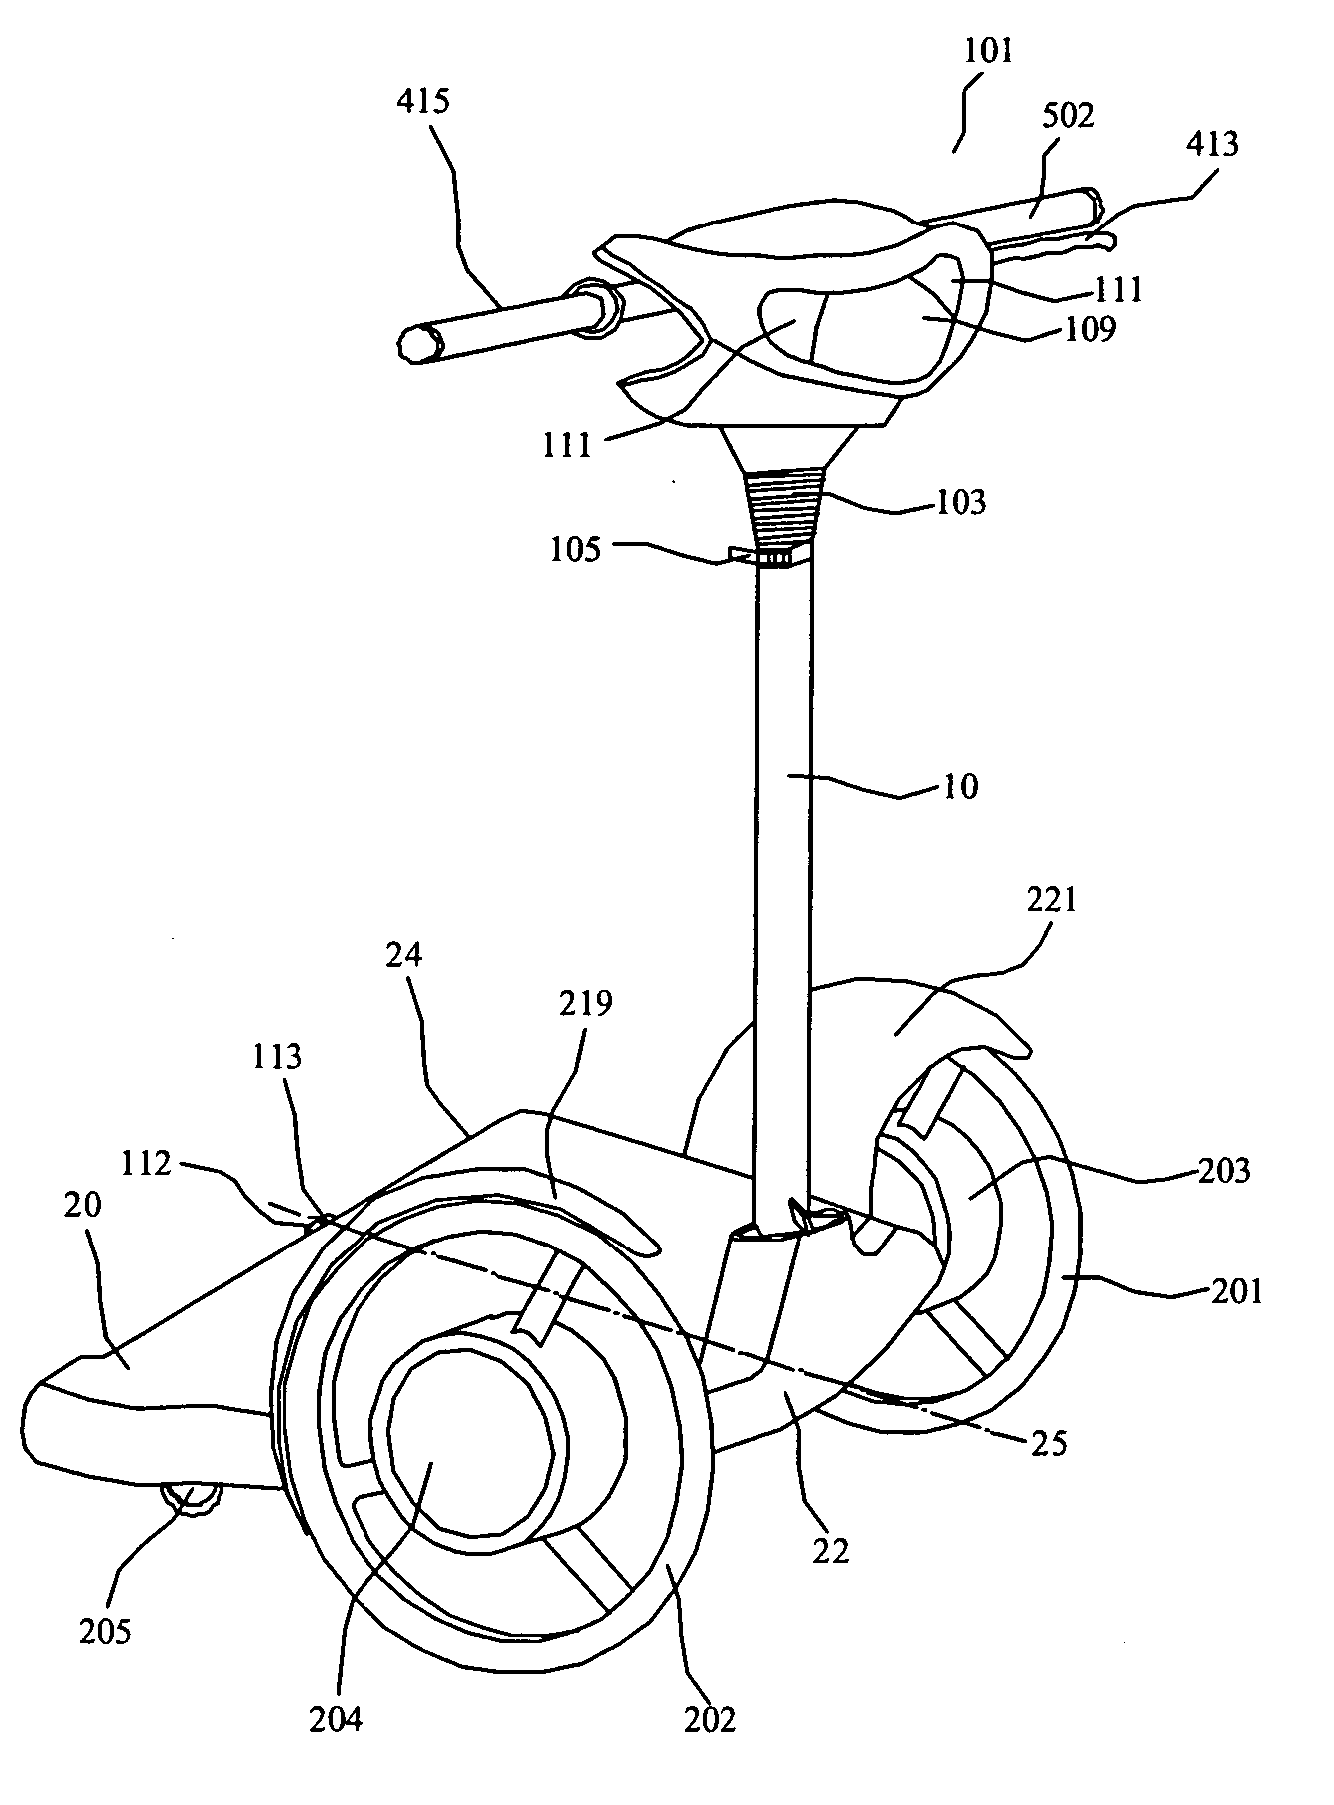 Drive mechanism for vehicle